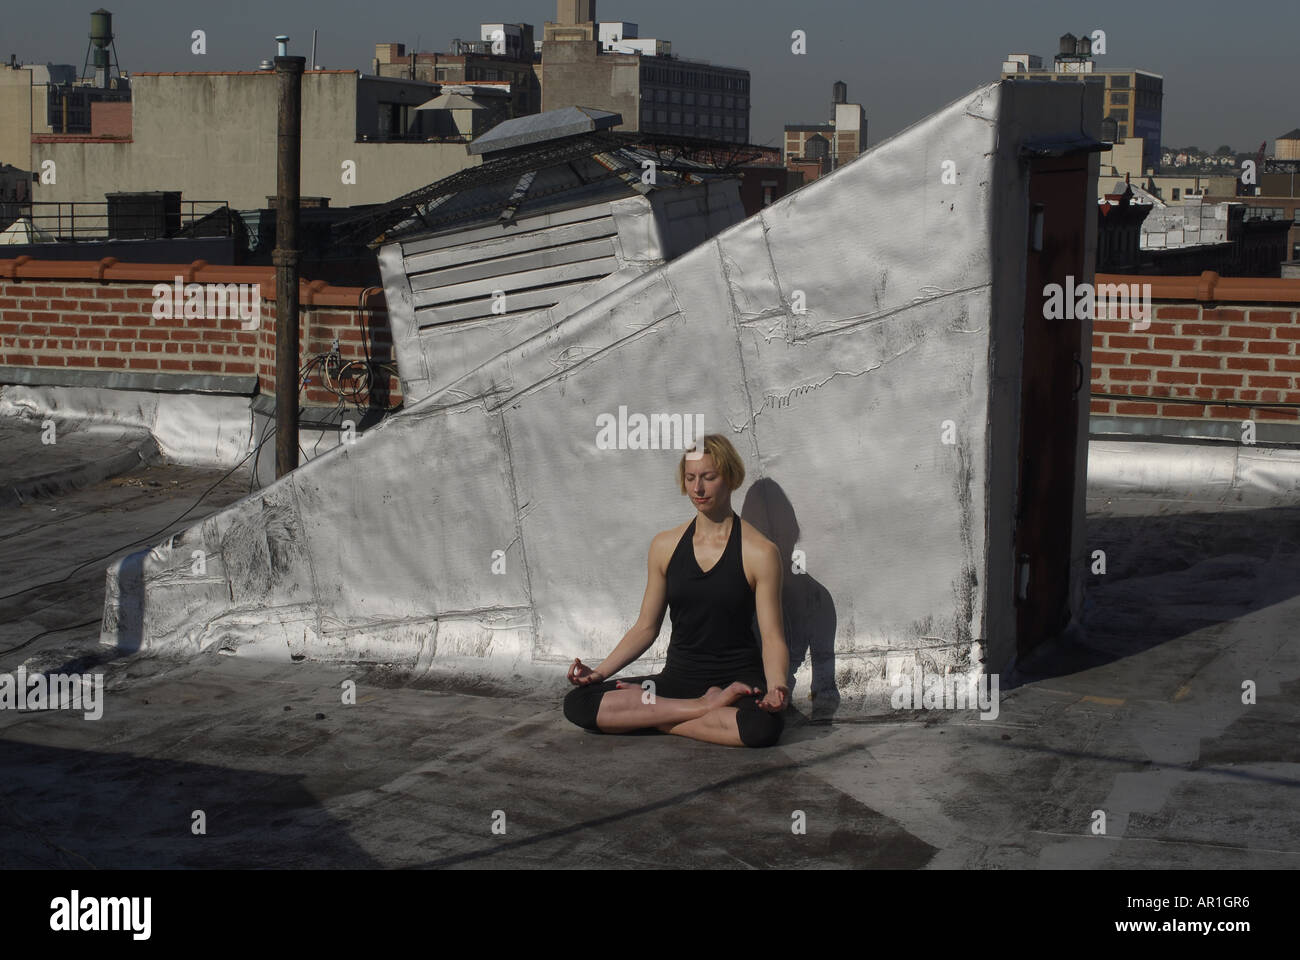 Model released New York CIty Thirty years old blond woman dancing on a building roof in a sunny morning in mid town Manhattan ex Stock Photo